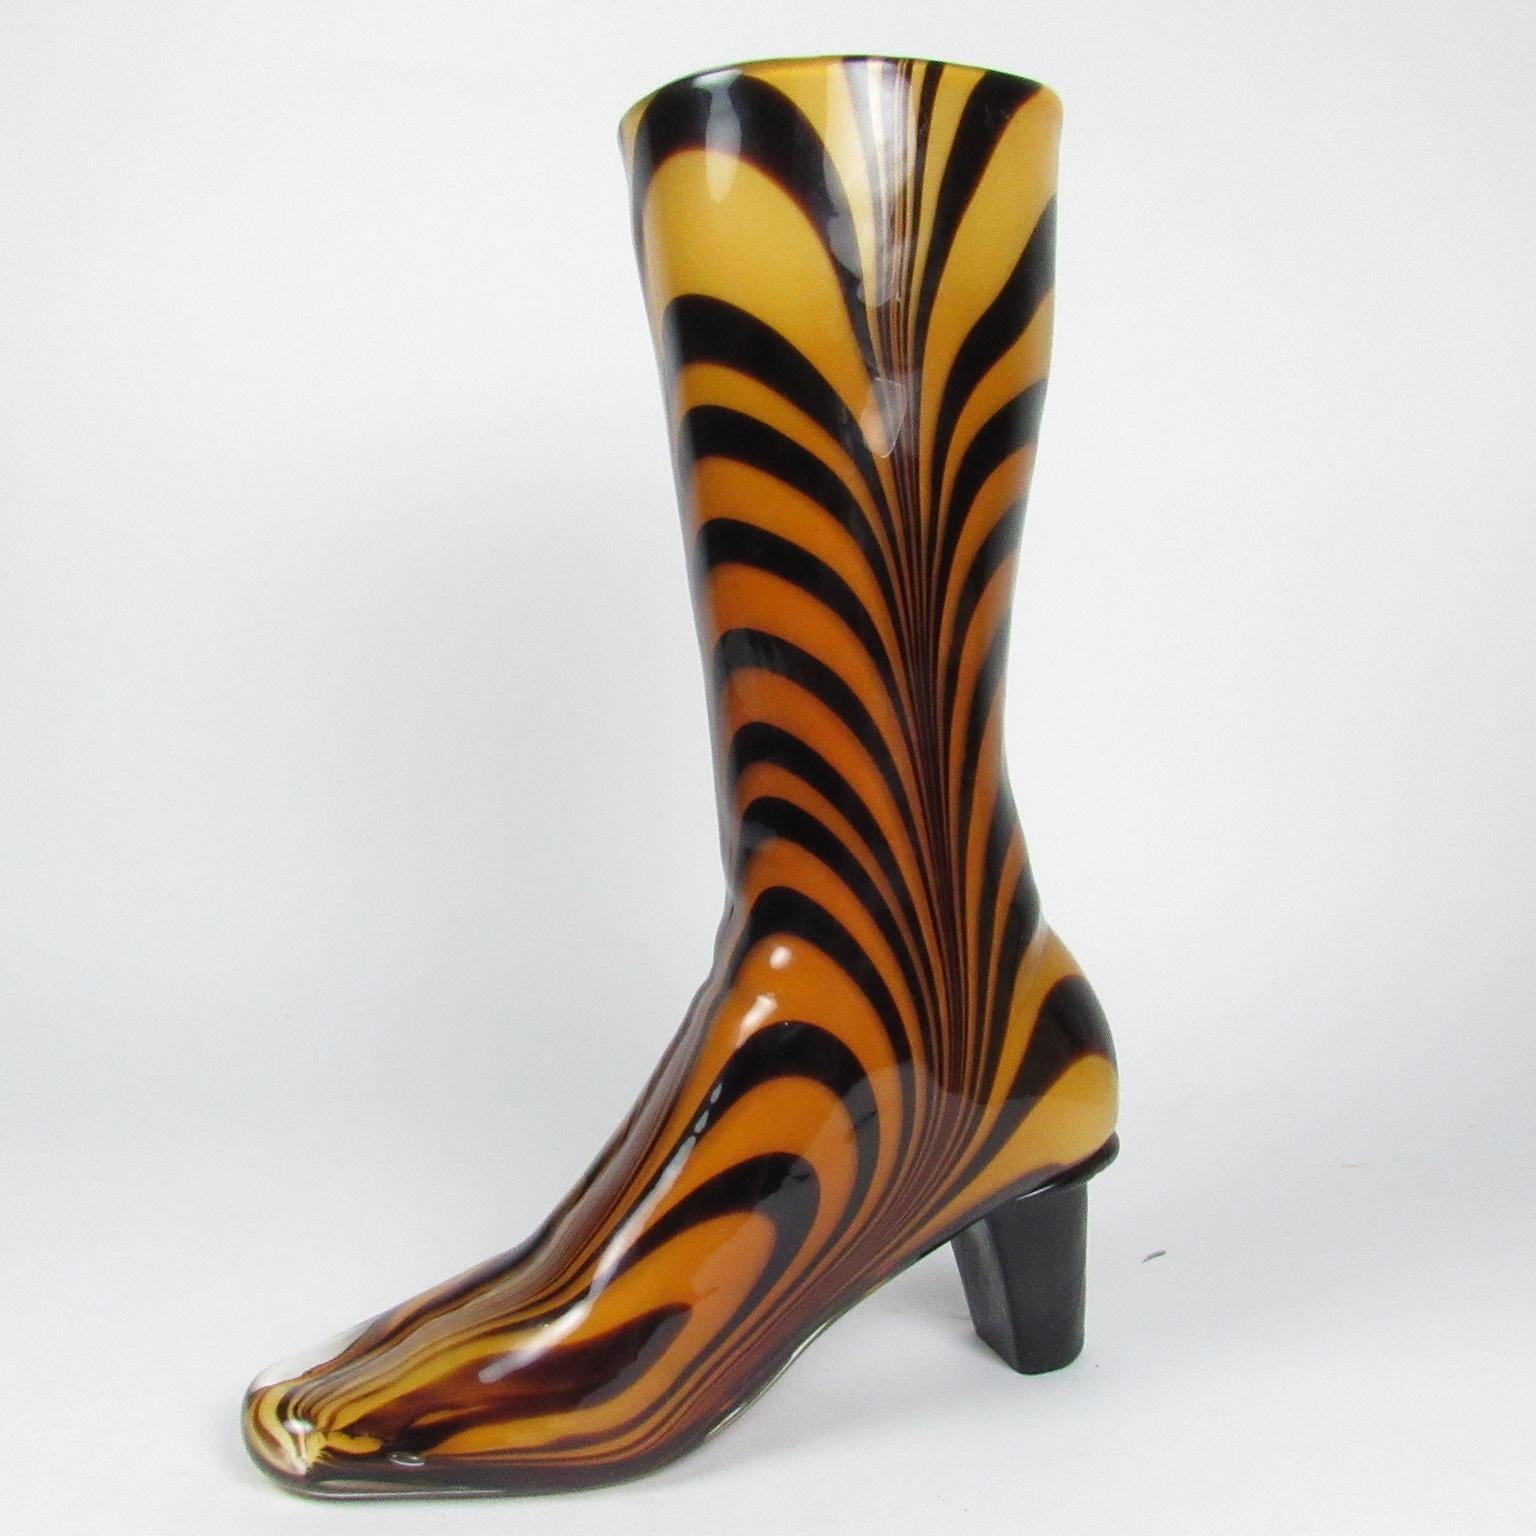 Mid-Century Modern Murano glass vase shaped as a ladies boot. A tall boot with a wild pattern in dark and light brown glass. Height: 13 in., 9 1/4 x 3 3/4 in.